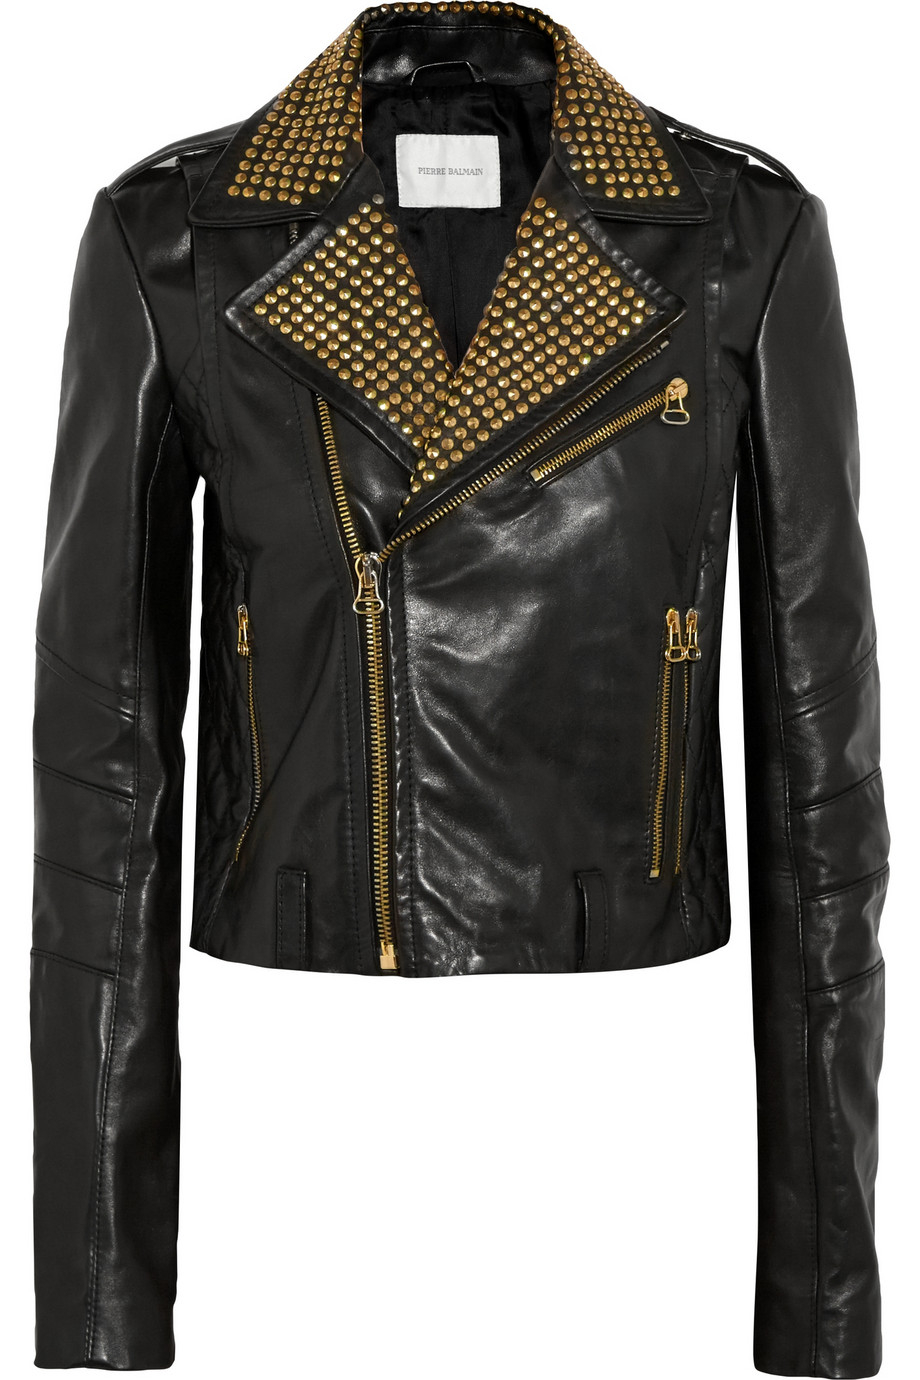 Pierre balmain Studded Leather Jacket in Black (Charcoal) | Lyst